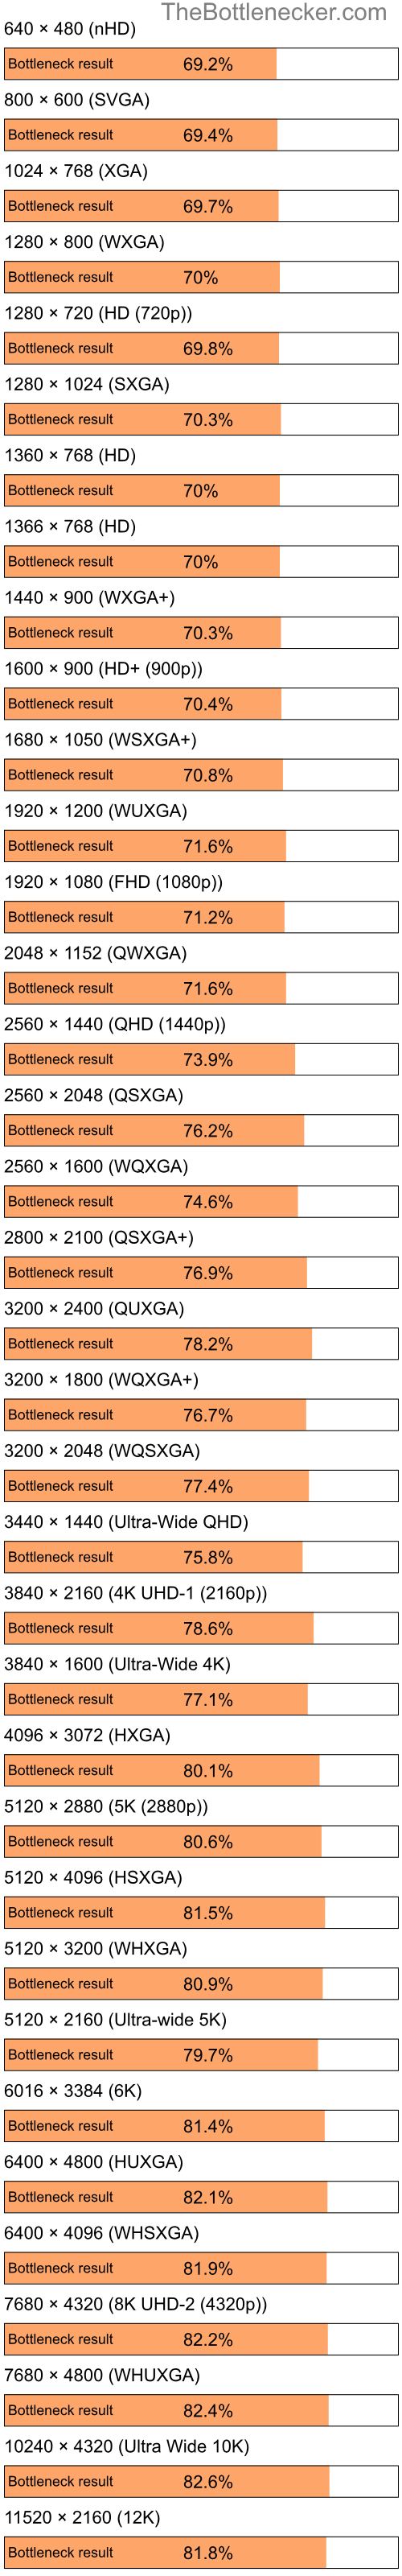 Bottleneck results by resolution for Intel Atom N270 and AMD Radeon X700 in7 Days to Die